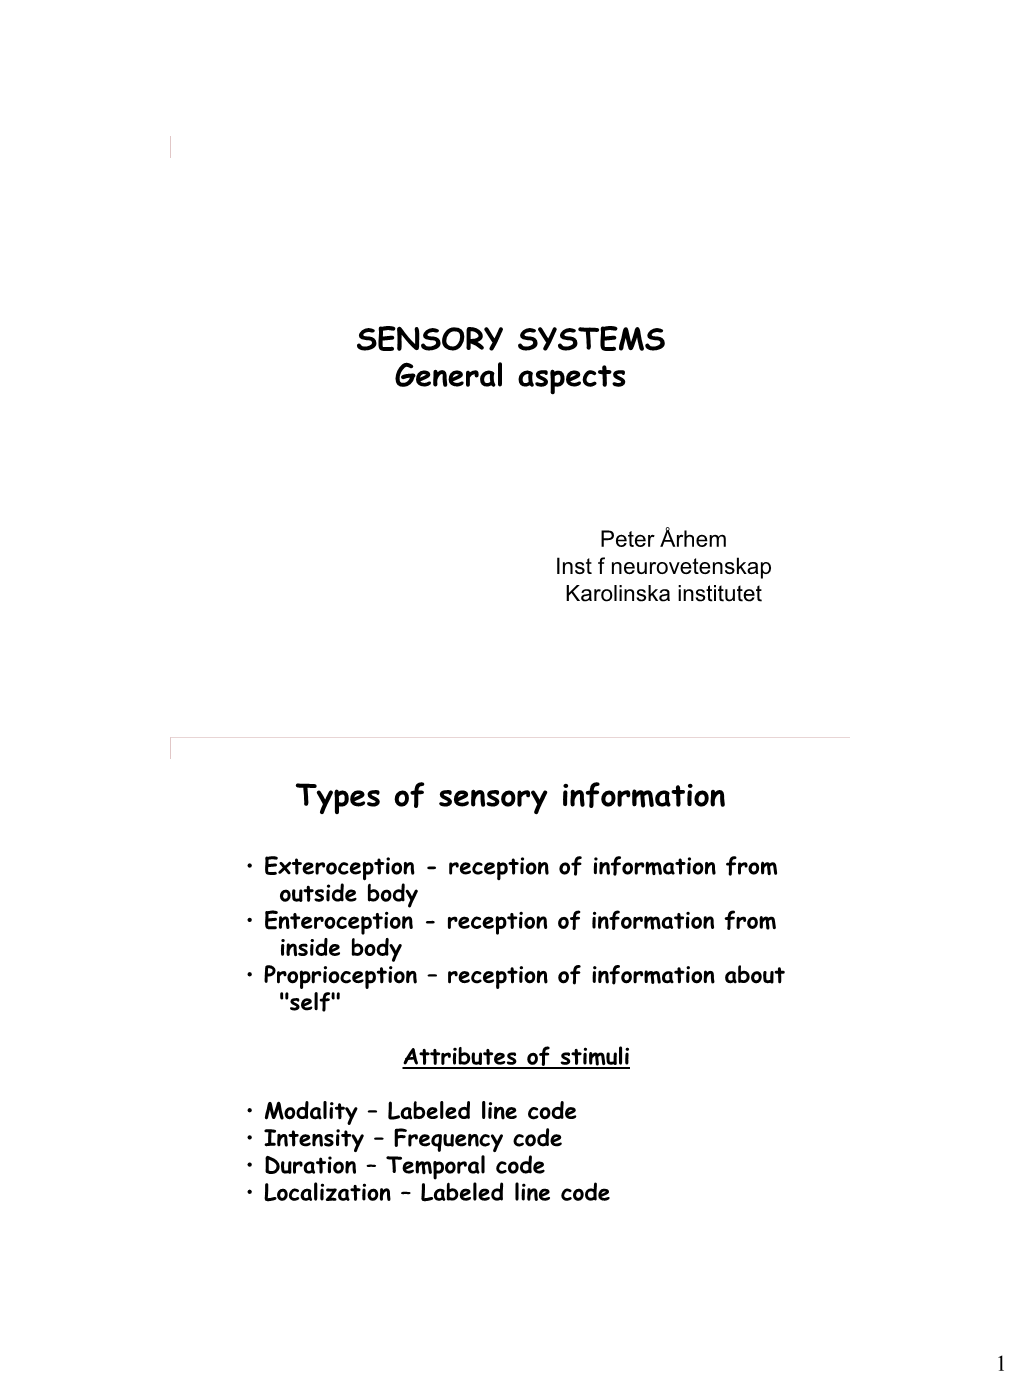 SENSORY SYSTEMS General Aspects